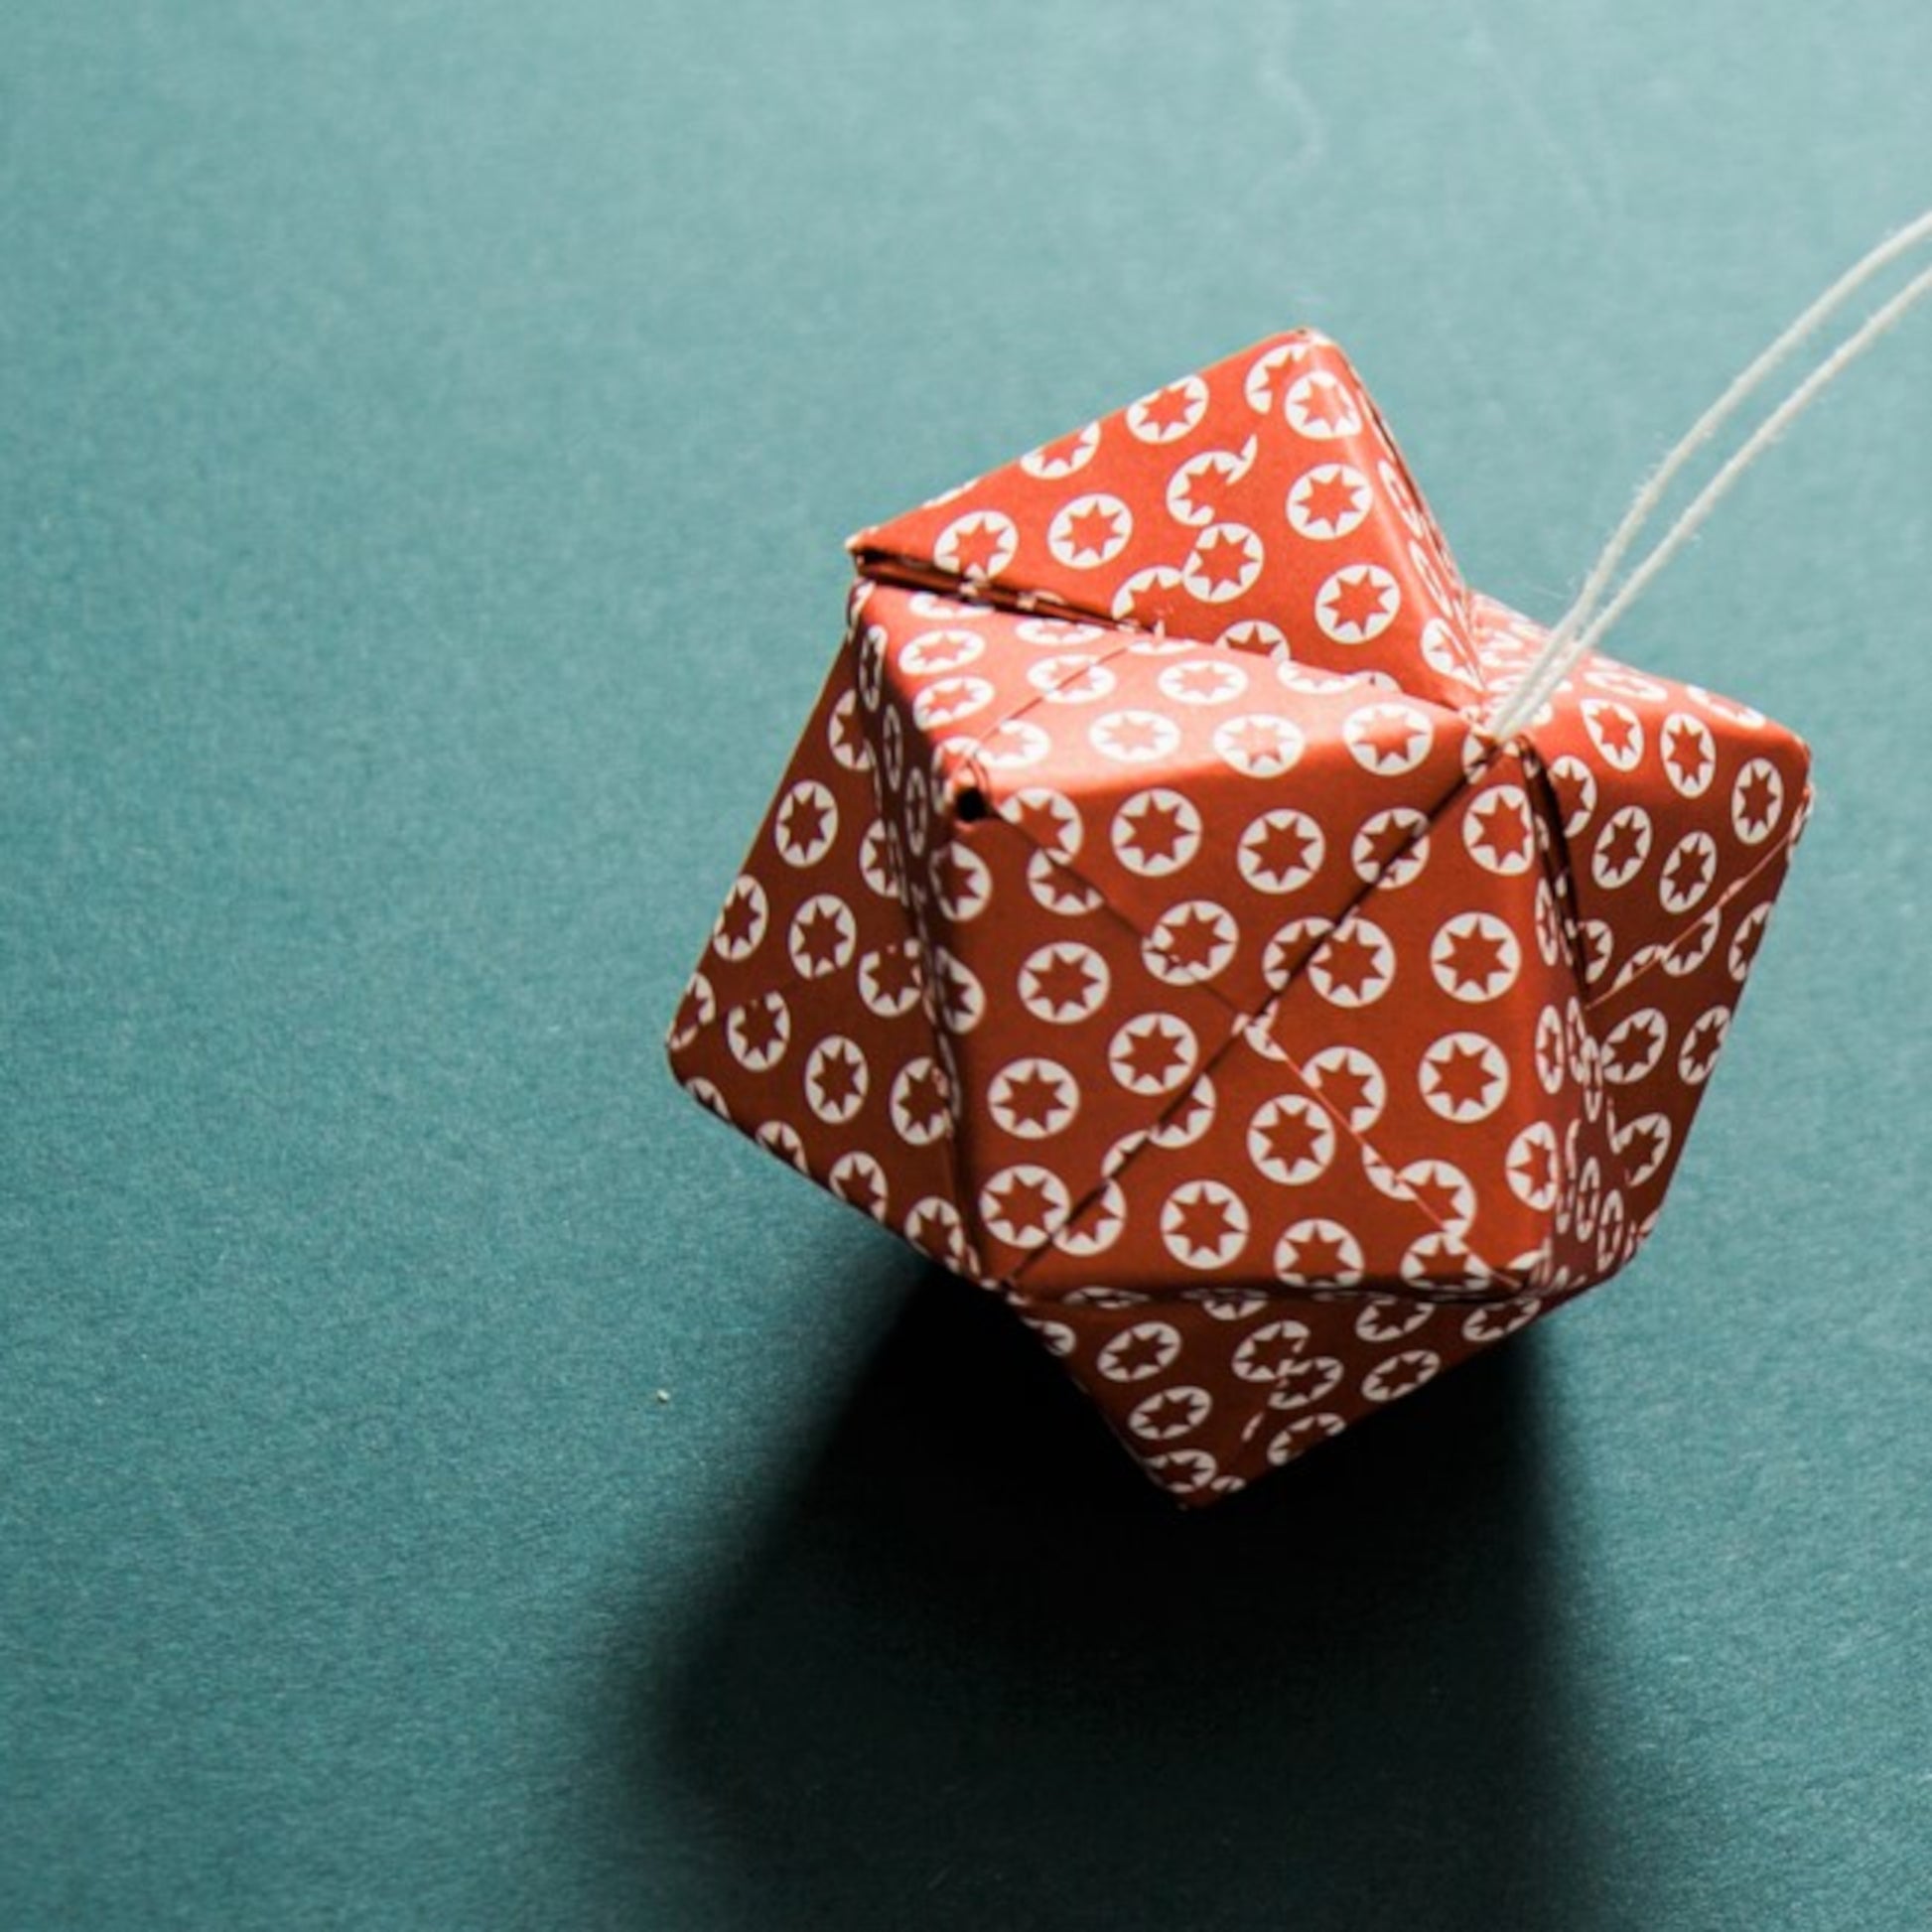 A set of patterned paper origami pyramid and bauble shaped decorations, in colours red, gold, navy and white, close-up of red paper bauble